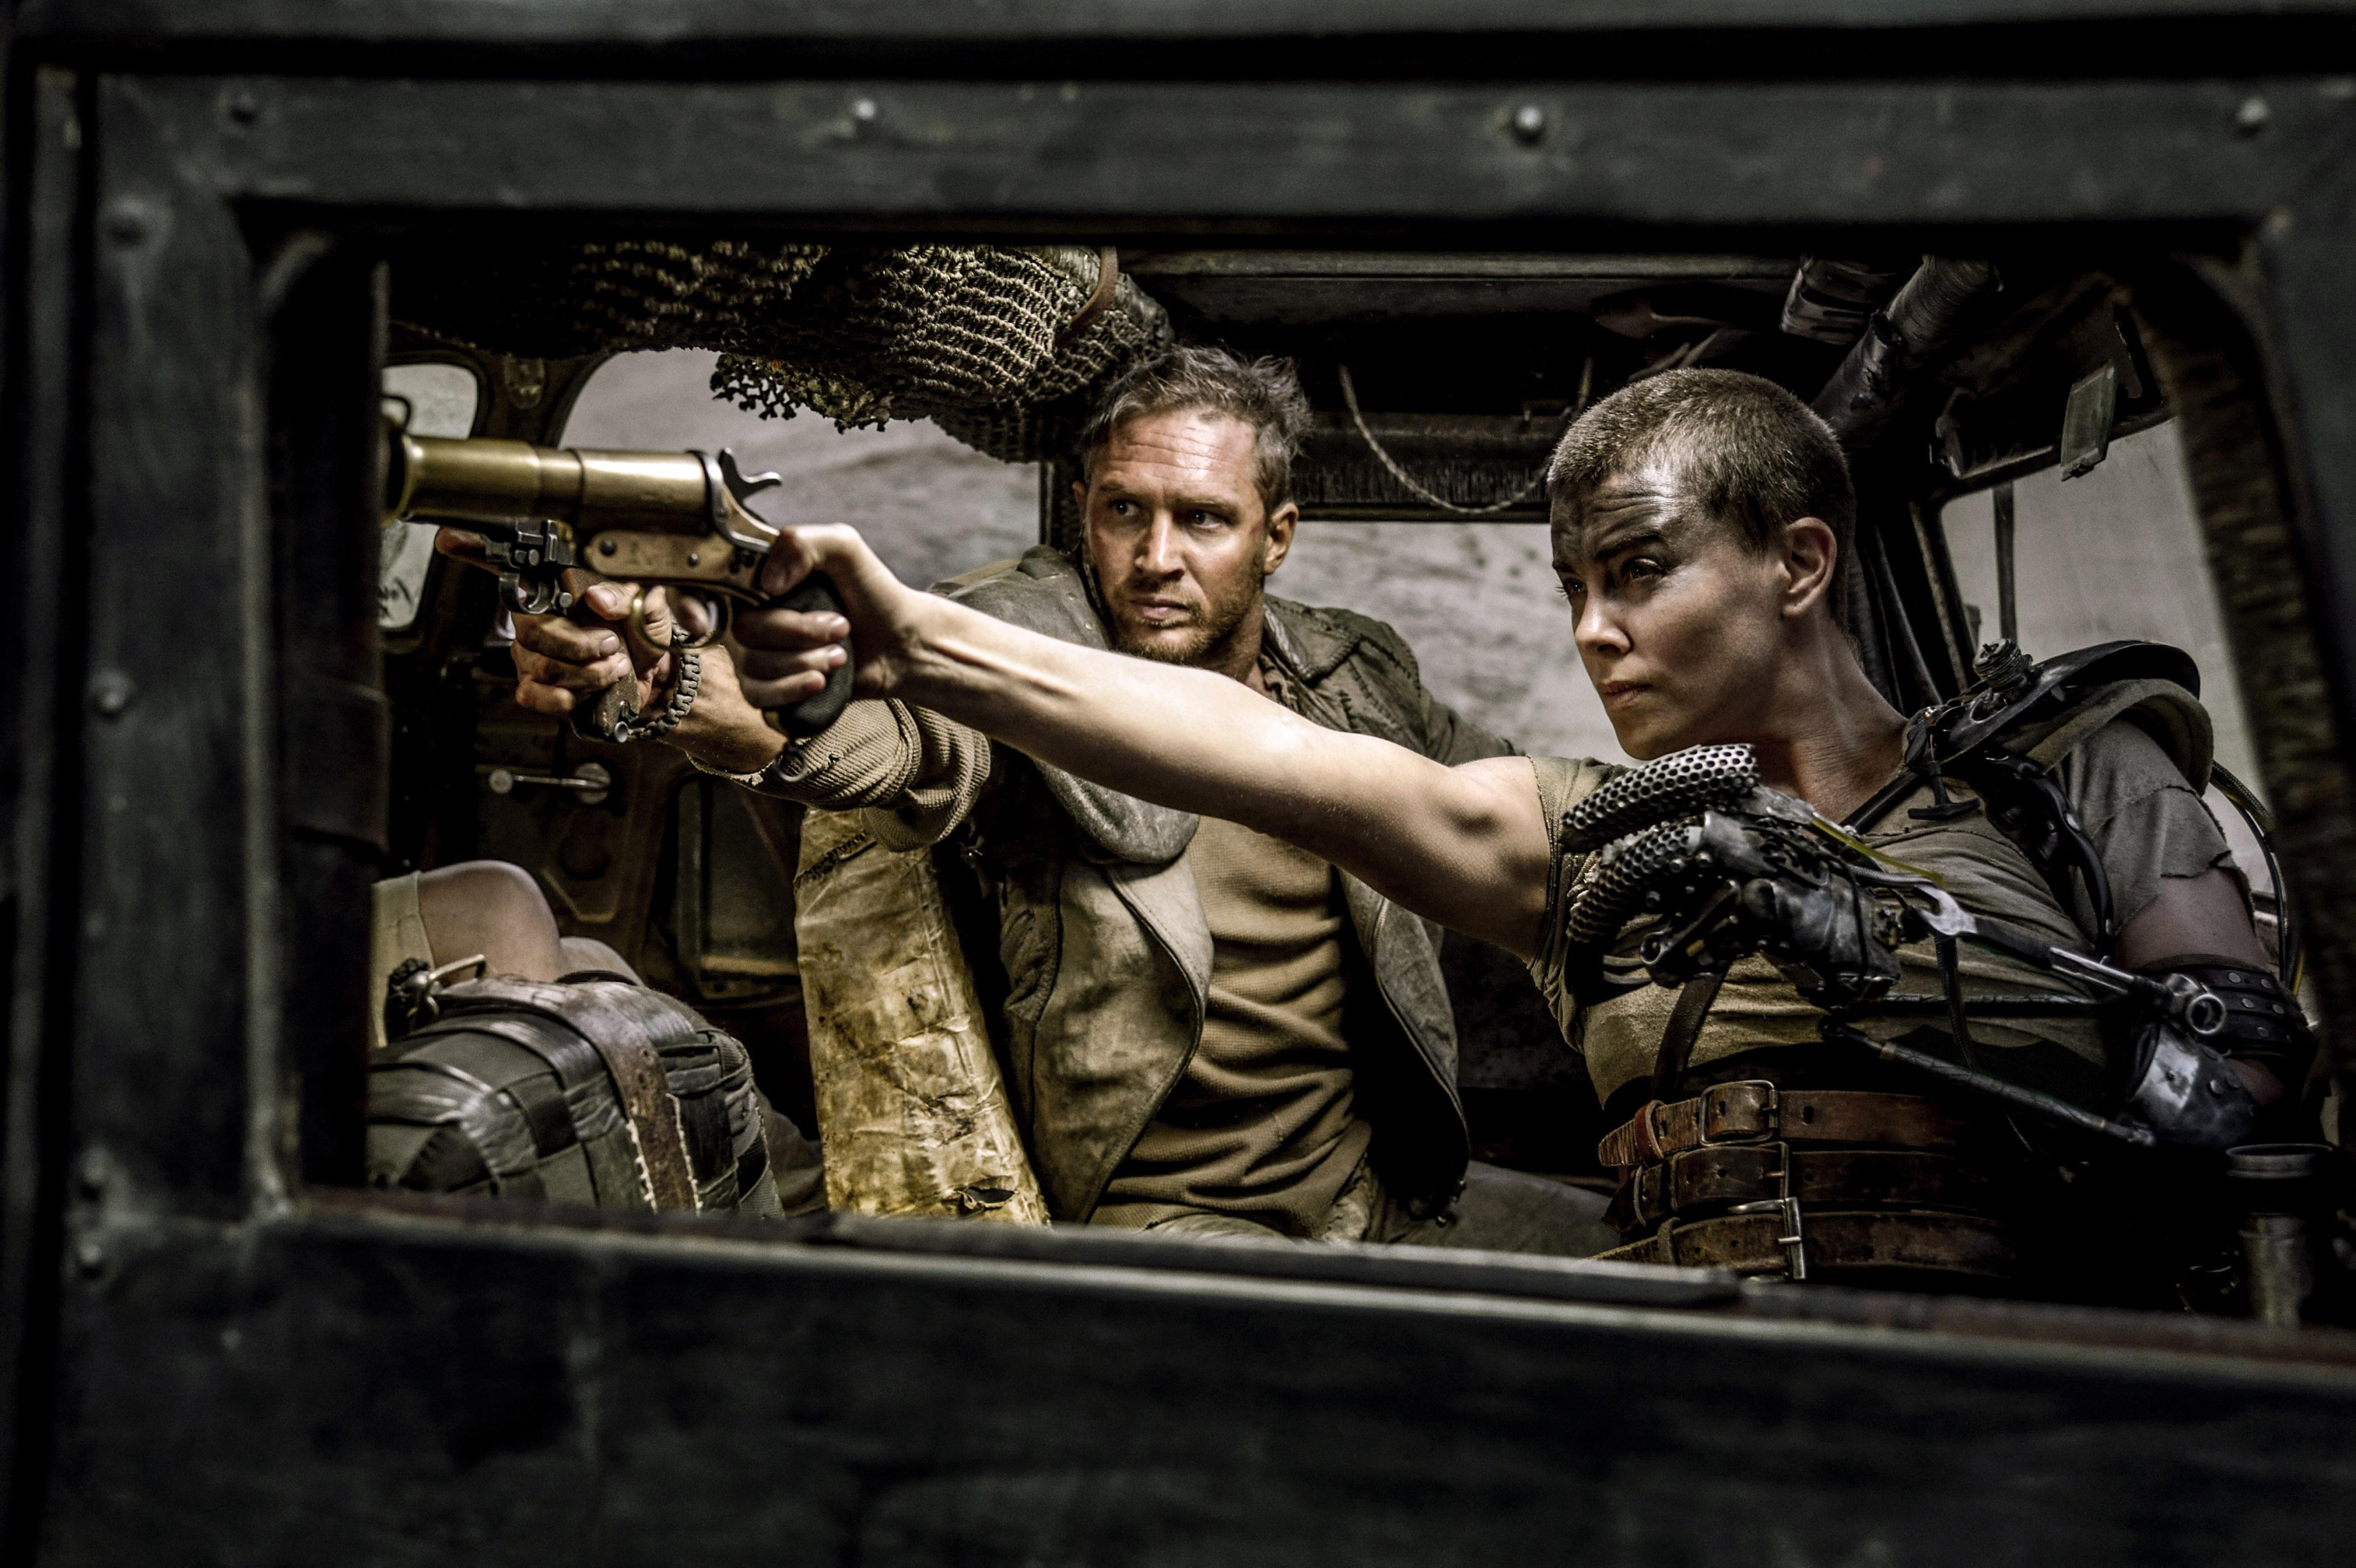 Charlize pictured with Tom Hardy, as Mad Max, in a scene from Fury Road